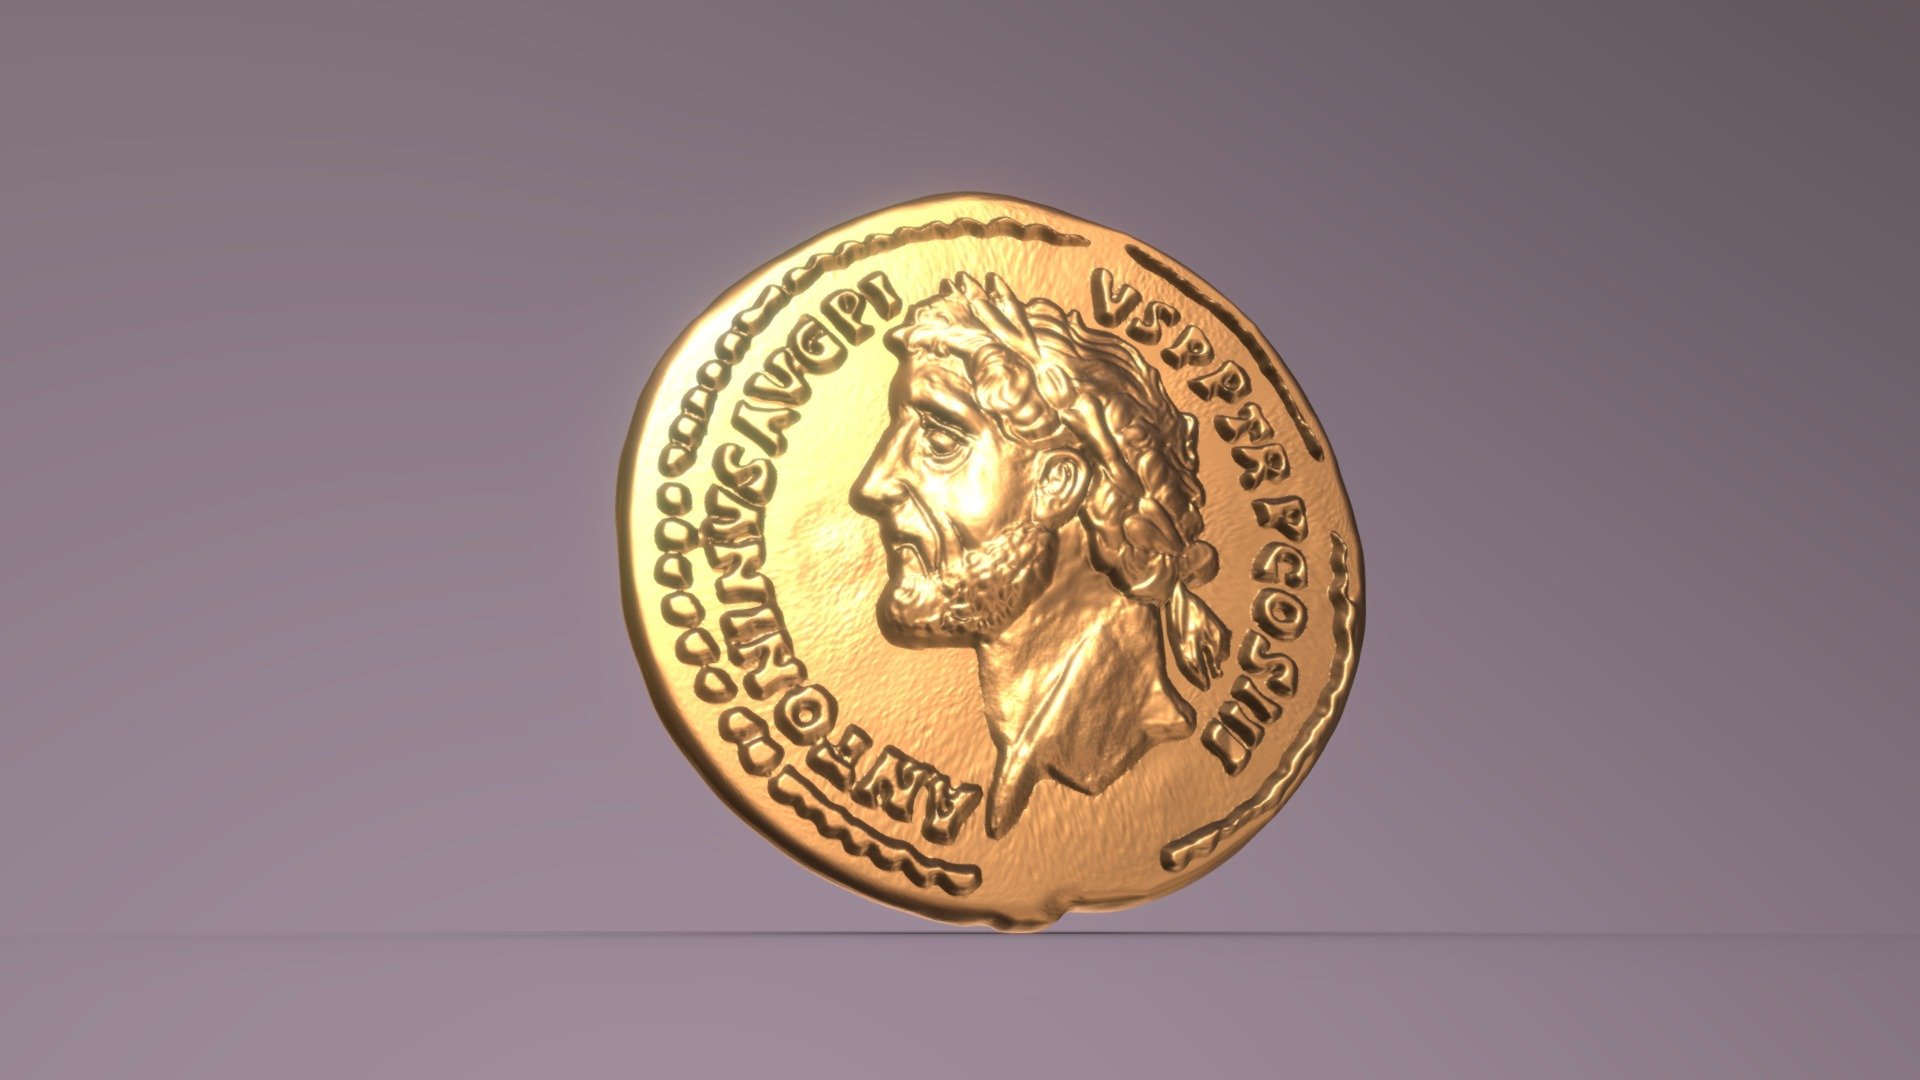 3d print model of old Rome coin
Maded in Blender 2.8 - COIN, ANTONINUS PIUS, AUREUS, ROME, AU(50-53), G - Buy Royalty Free 3D model by pinotoon 3d model